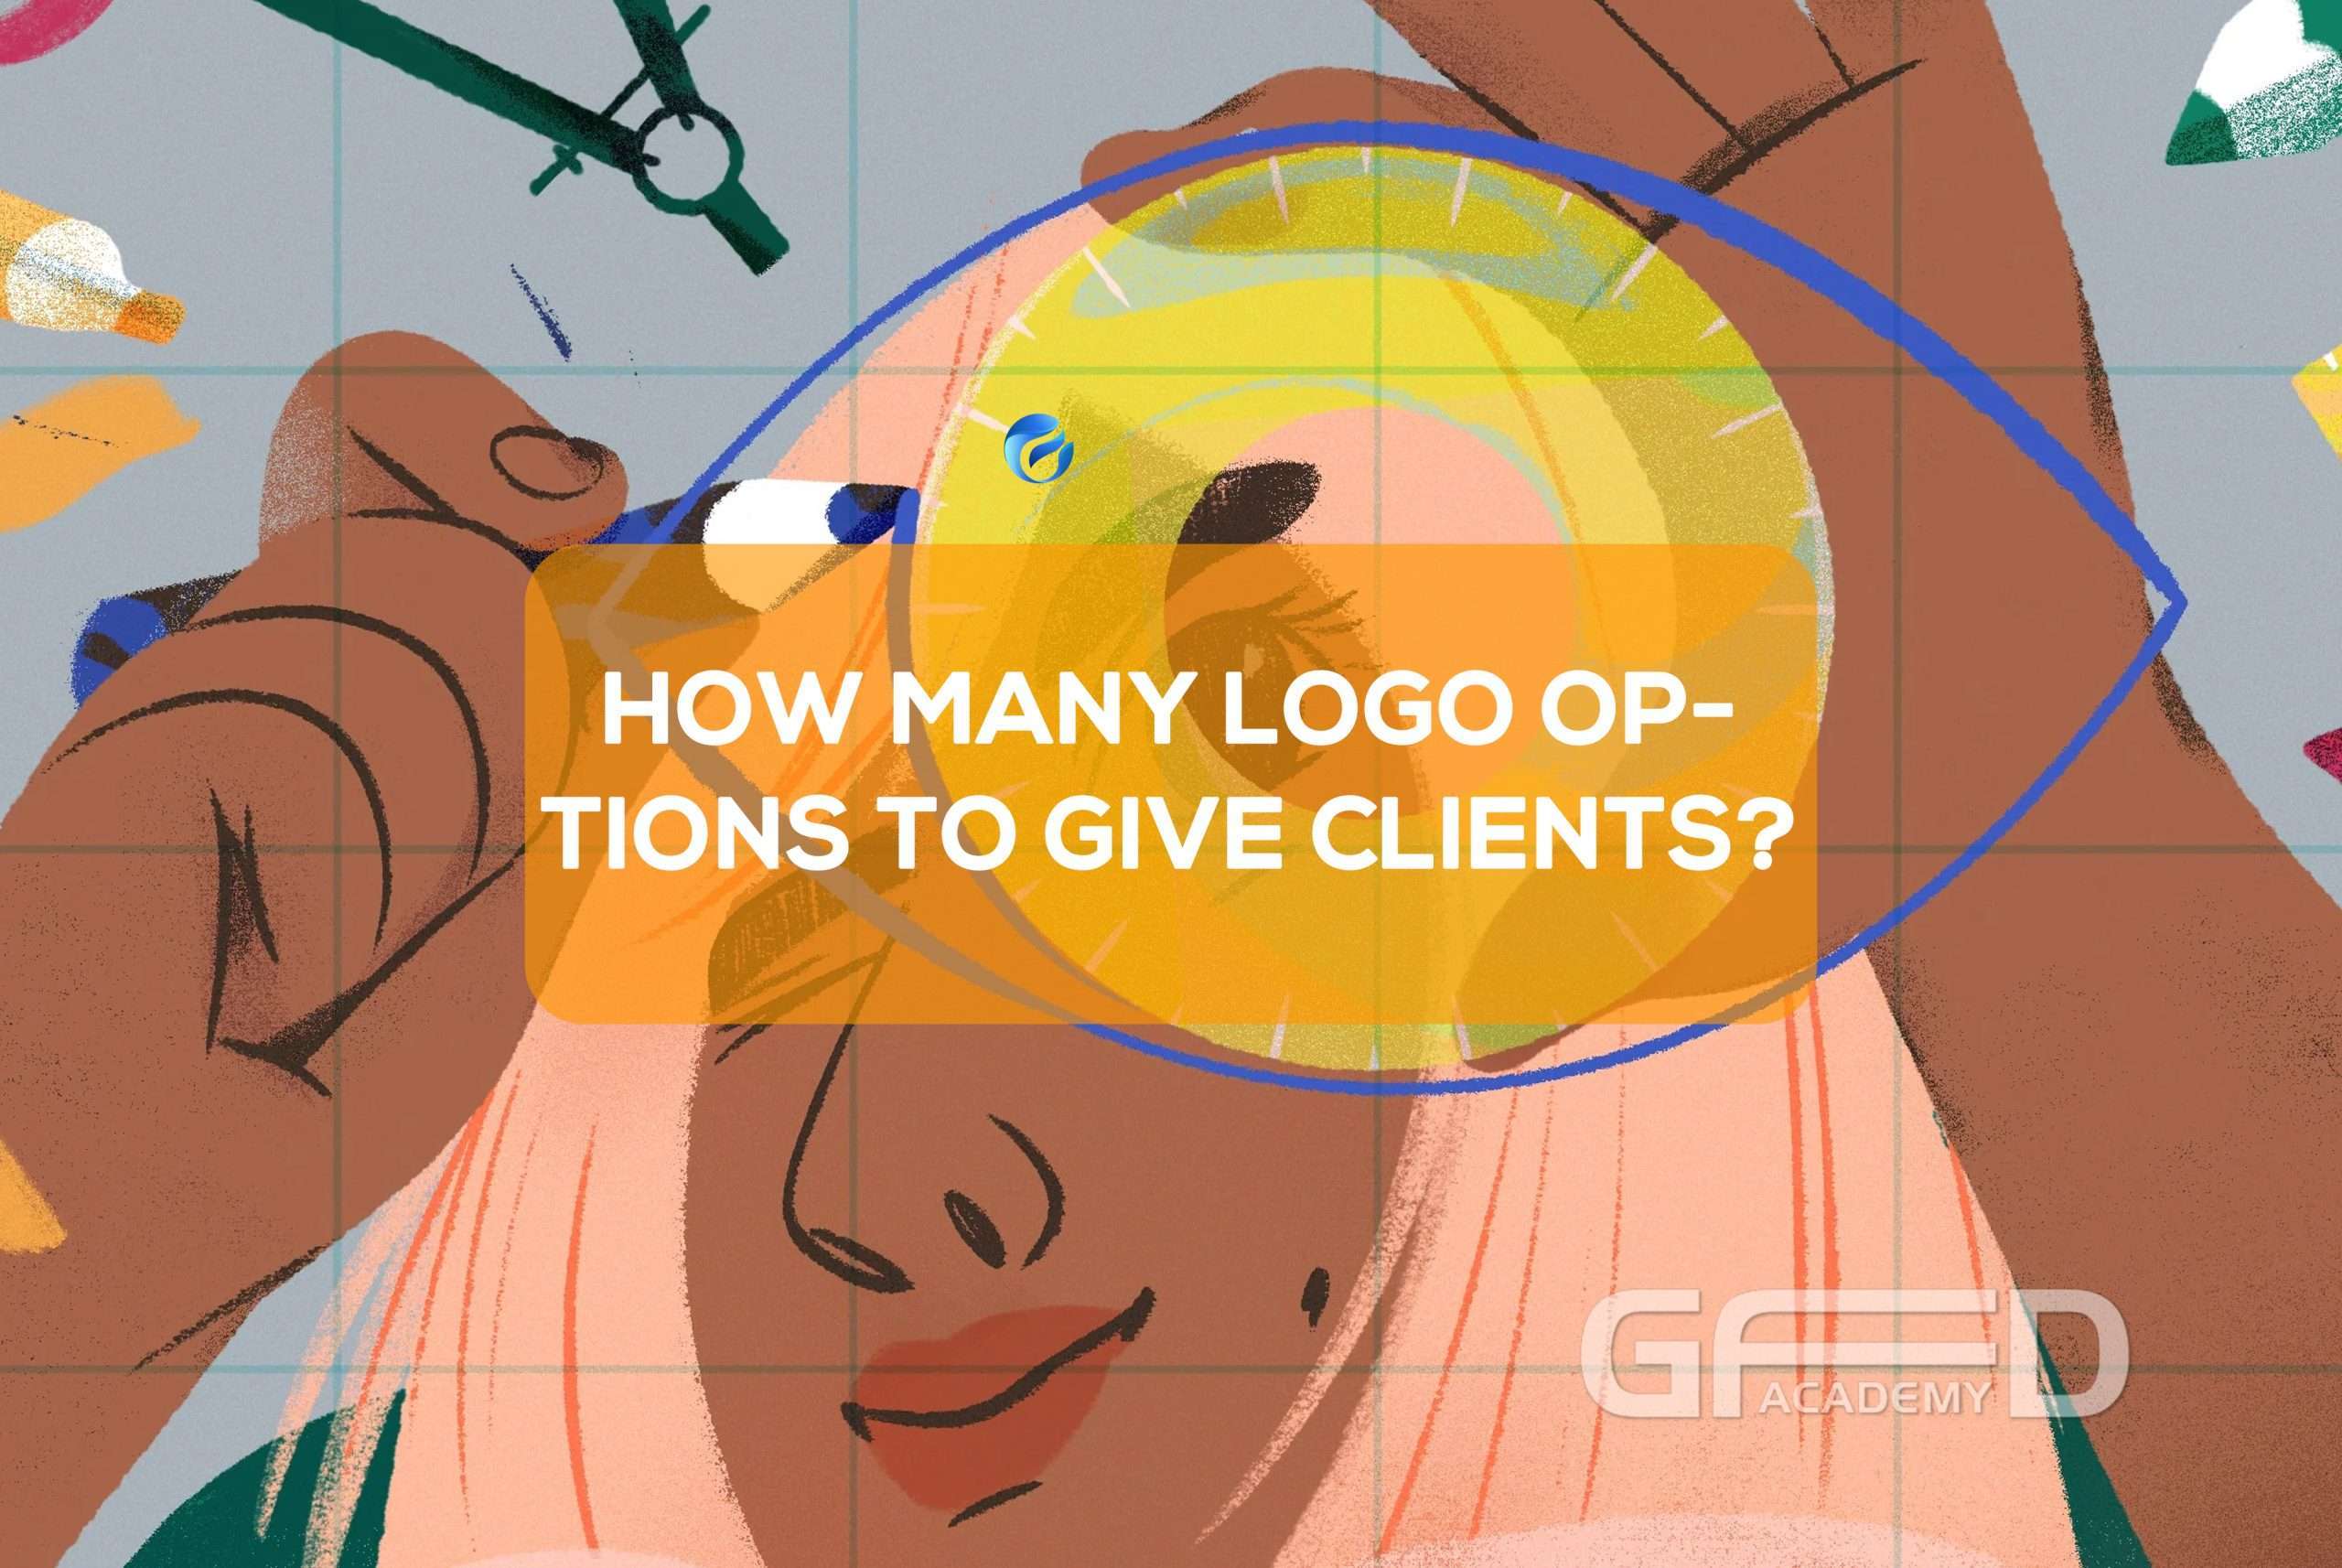 How many logo options to give clients?